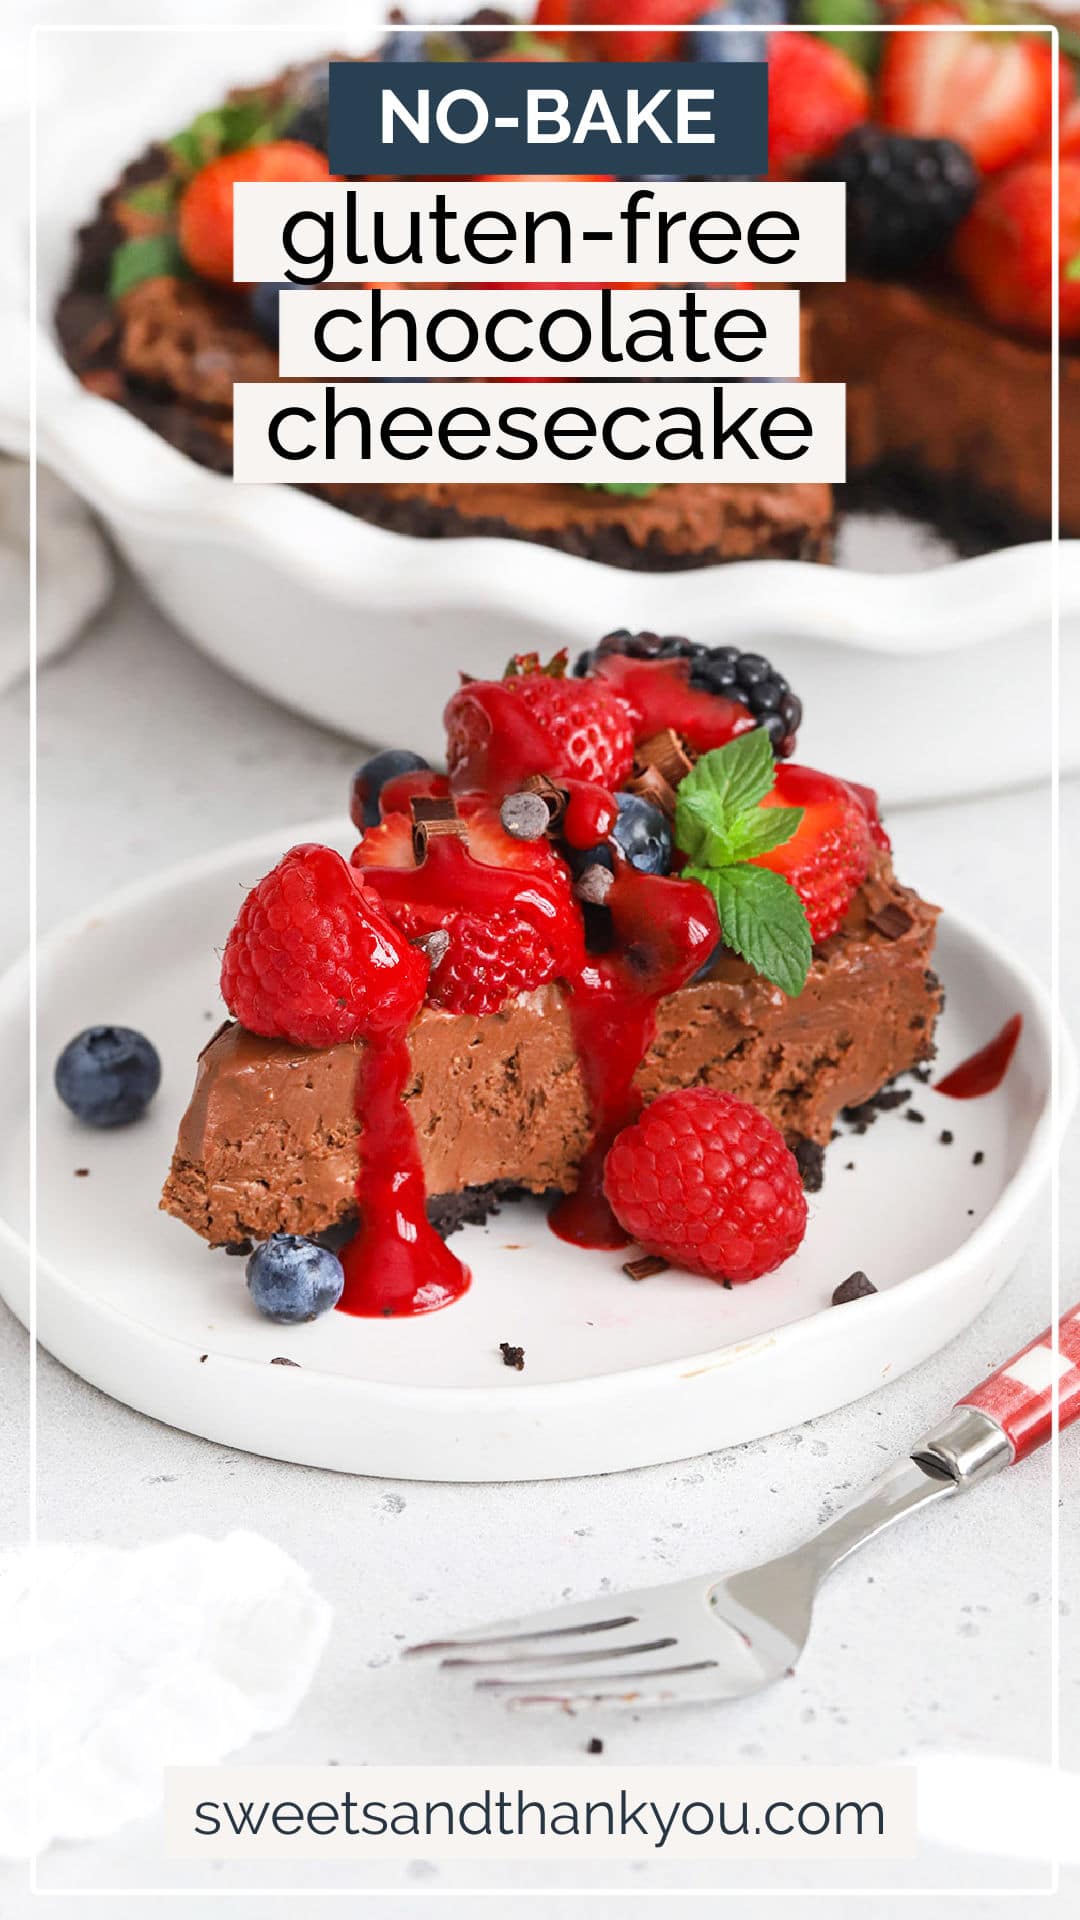 Gluten-Free Chocolate Cheesecake Pie - This easy no-bake gluten-free chocolate cheesecake recipe is easy, creamy, and totally delicious! // Gluten-free no-bake cheesecake recipe // gluten-free cheesecake recipe // no bake chocolate cheesecake // gluten-free chocolate cheesecake with oreo crust // gluten-free no bake desserts // no-bake pie // gluten-free pie recipe // gluten-free cheesecake pie // gluten-free chocolate cheesecake pie // gluten-free cheesecake in a pie pan